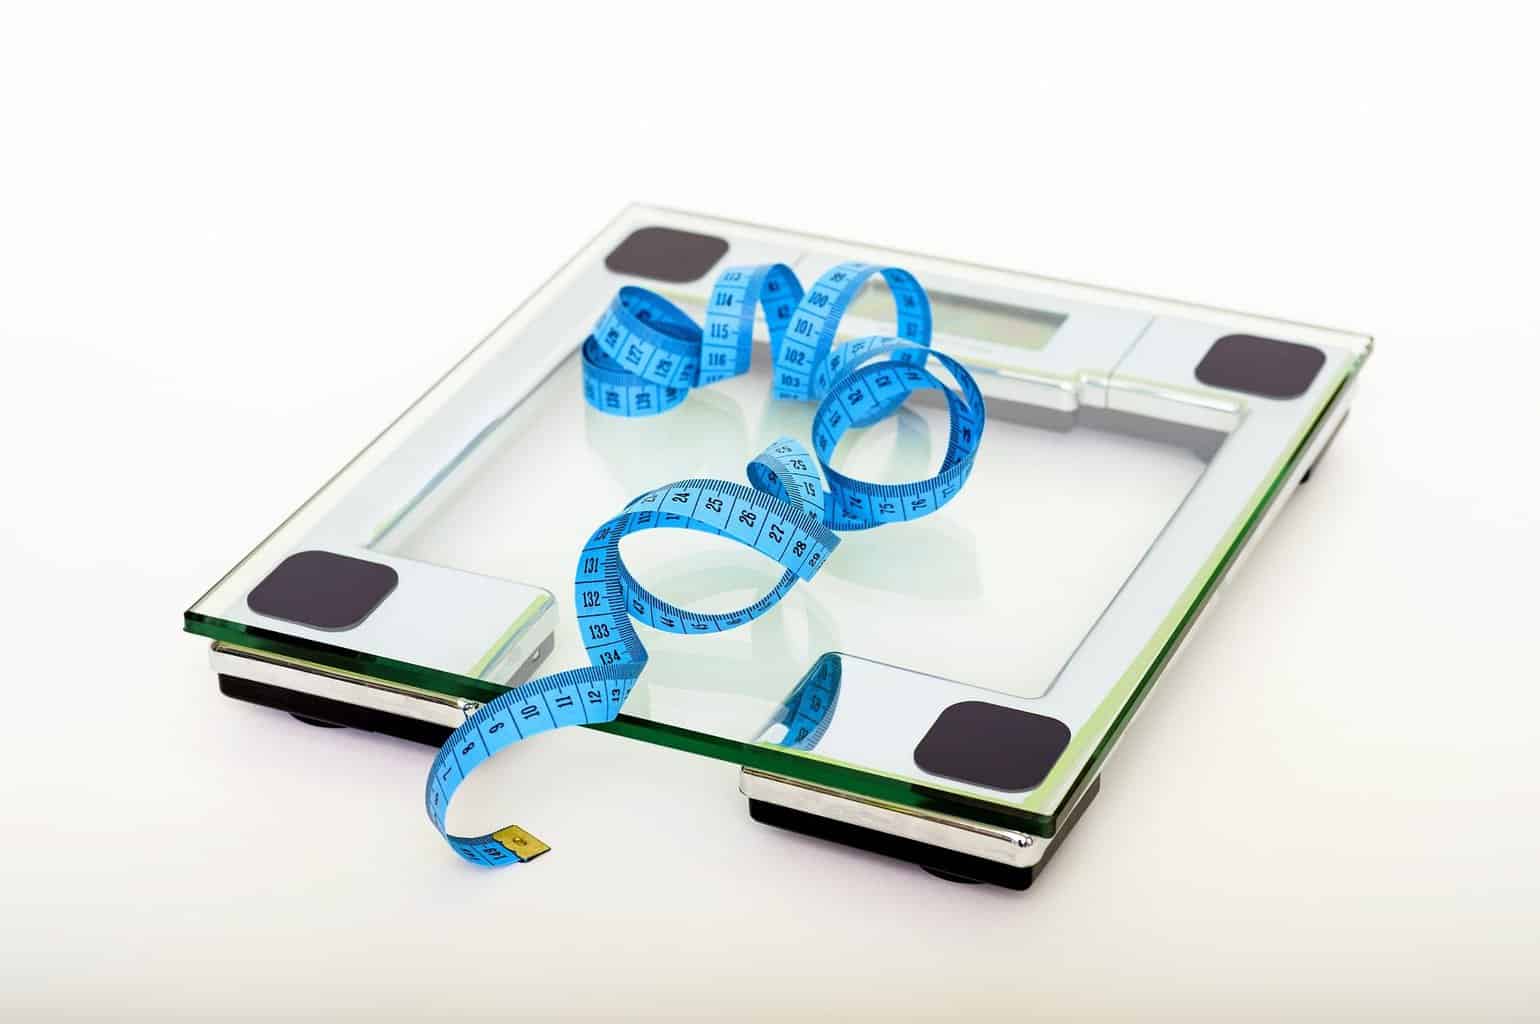 18 Common Weight Loss Mistakes to Avoid In 2021